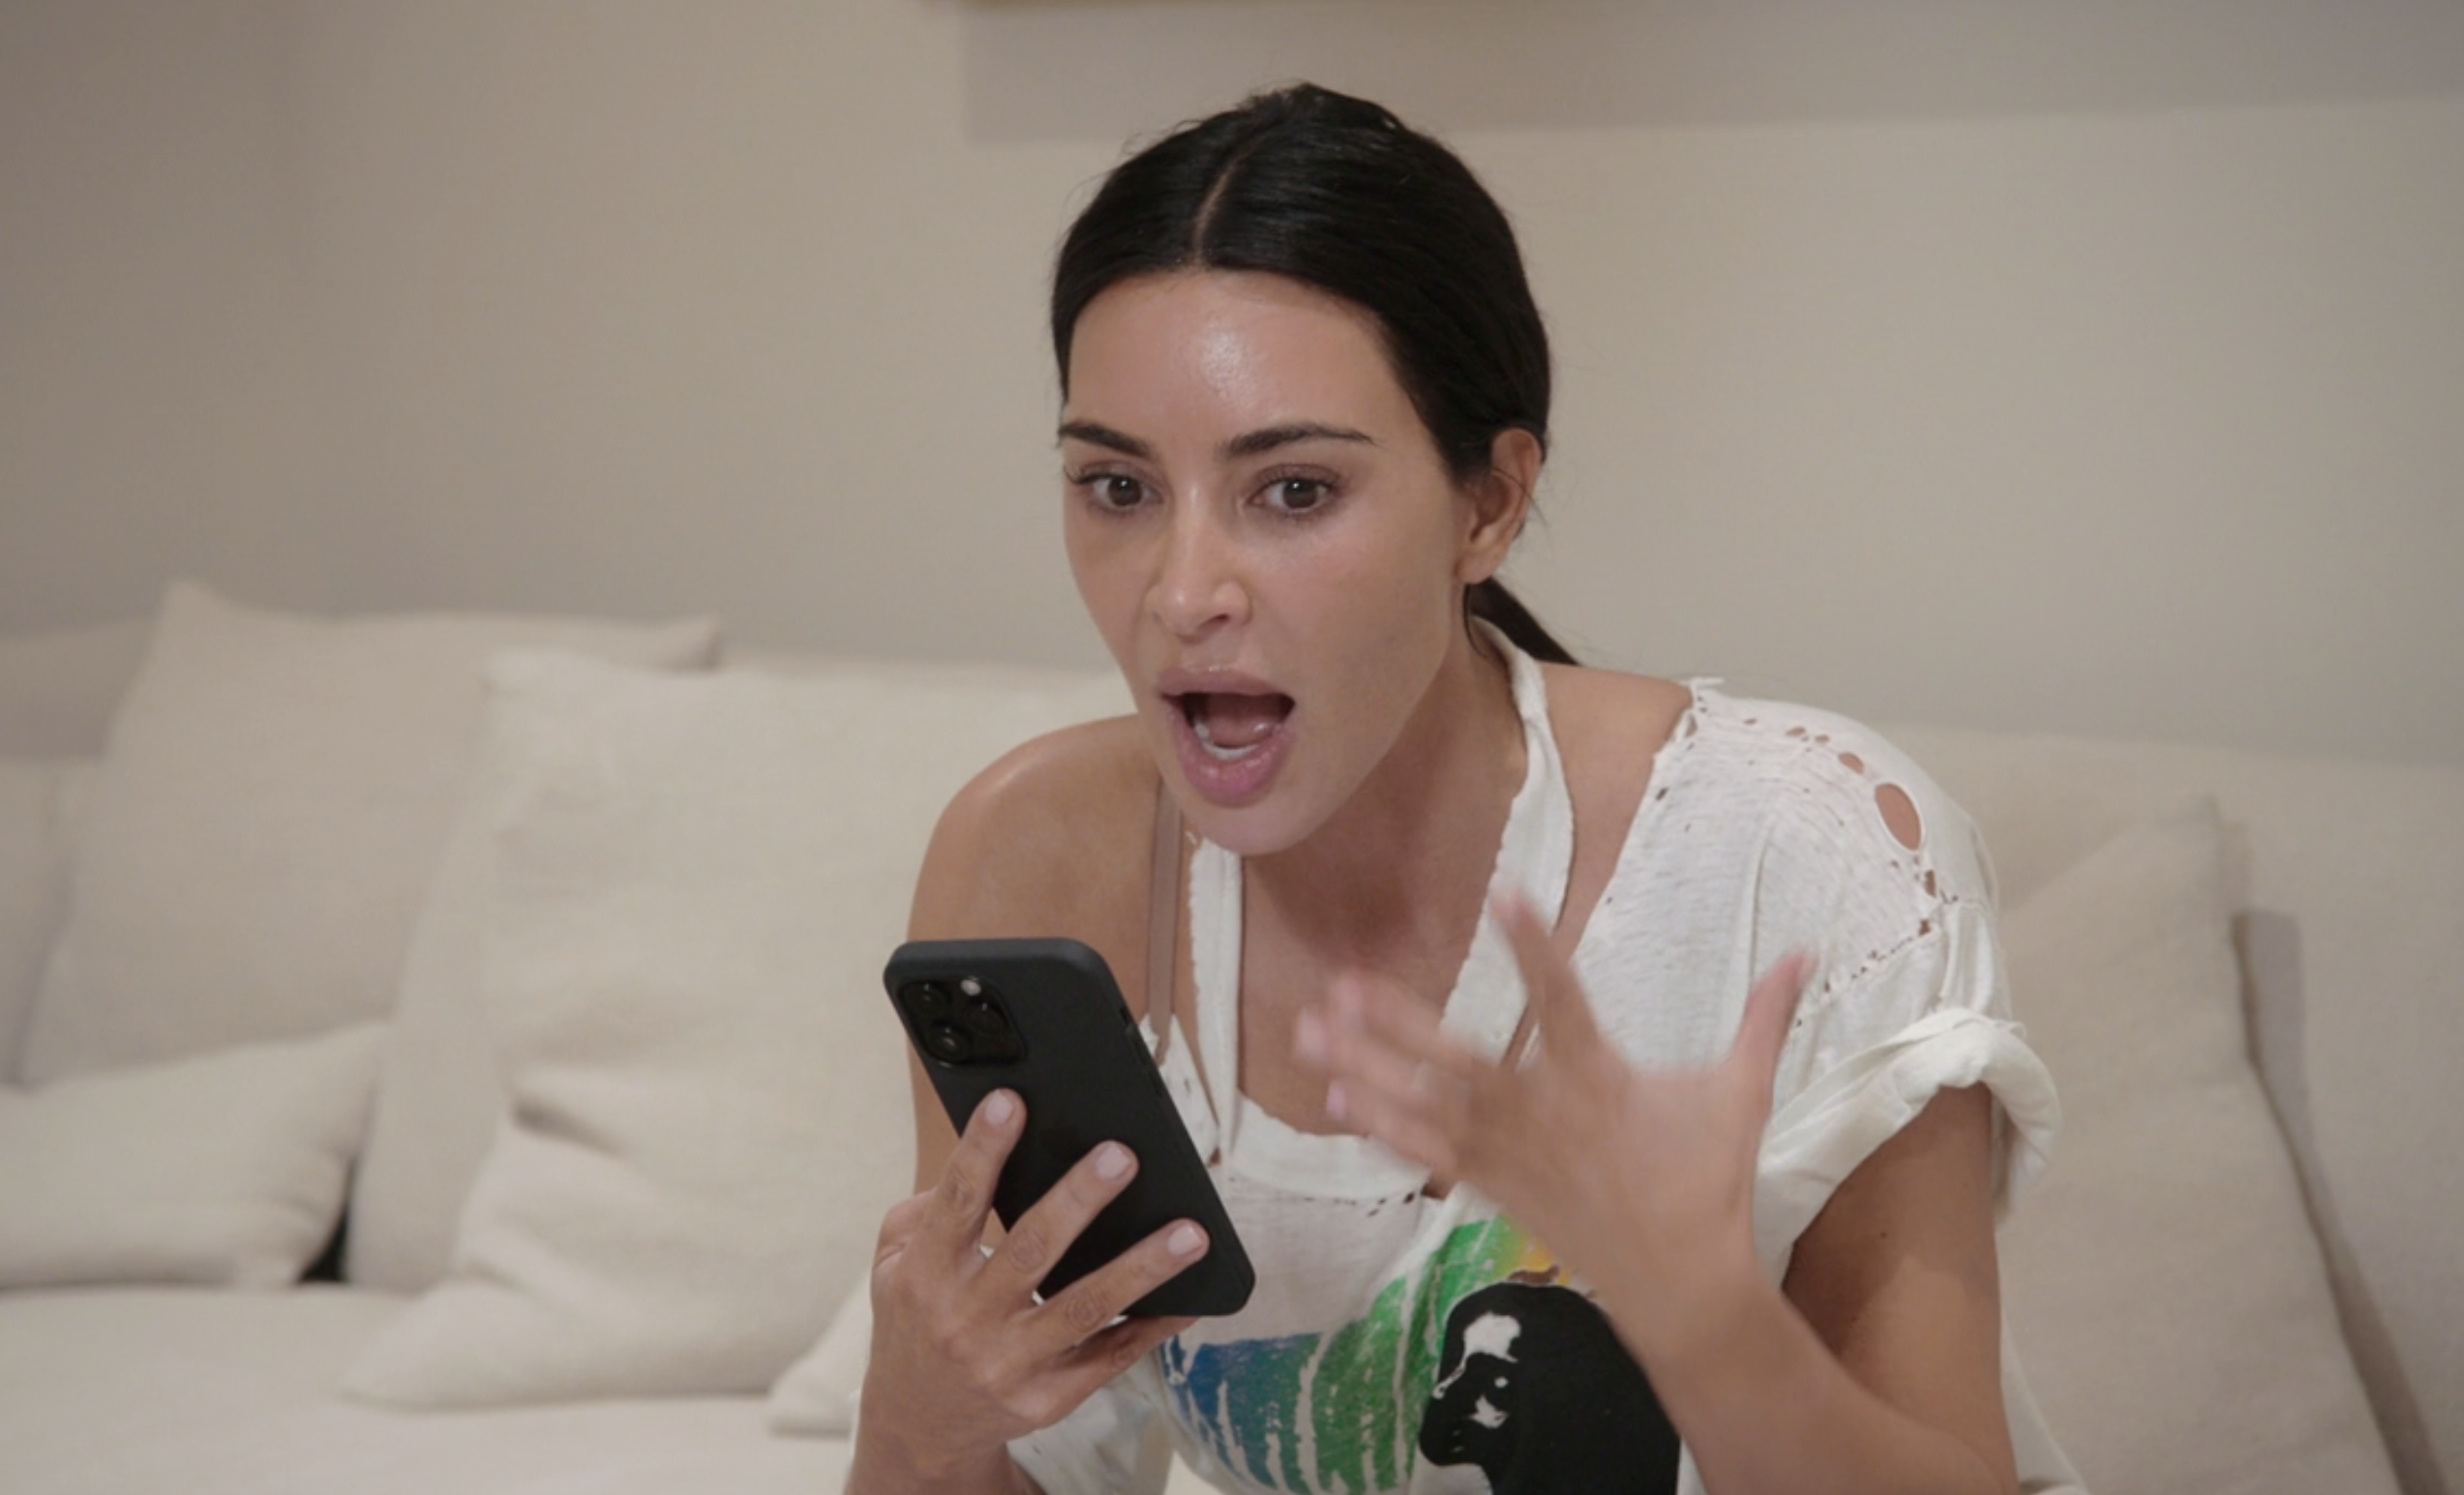 Kim sitting on a couch and talking into a phone